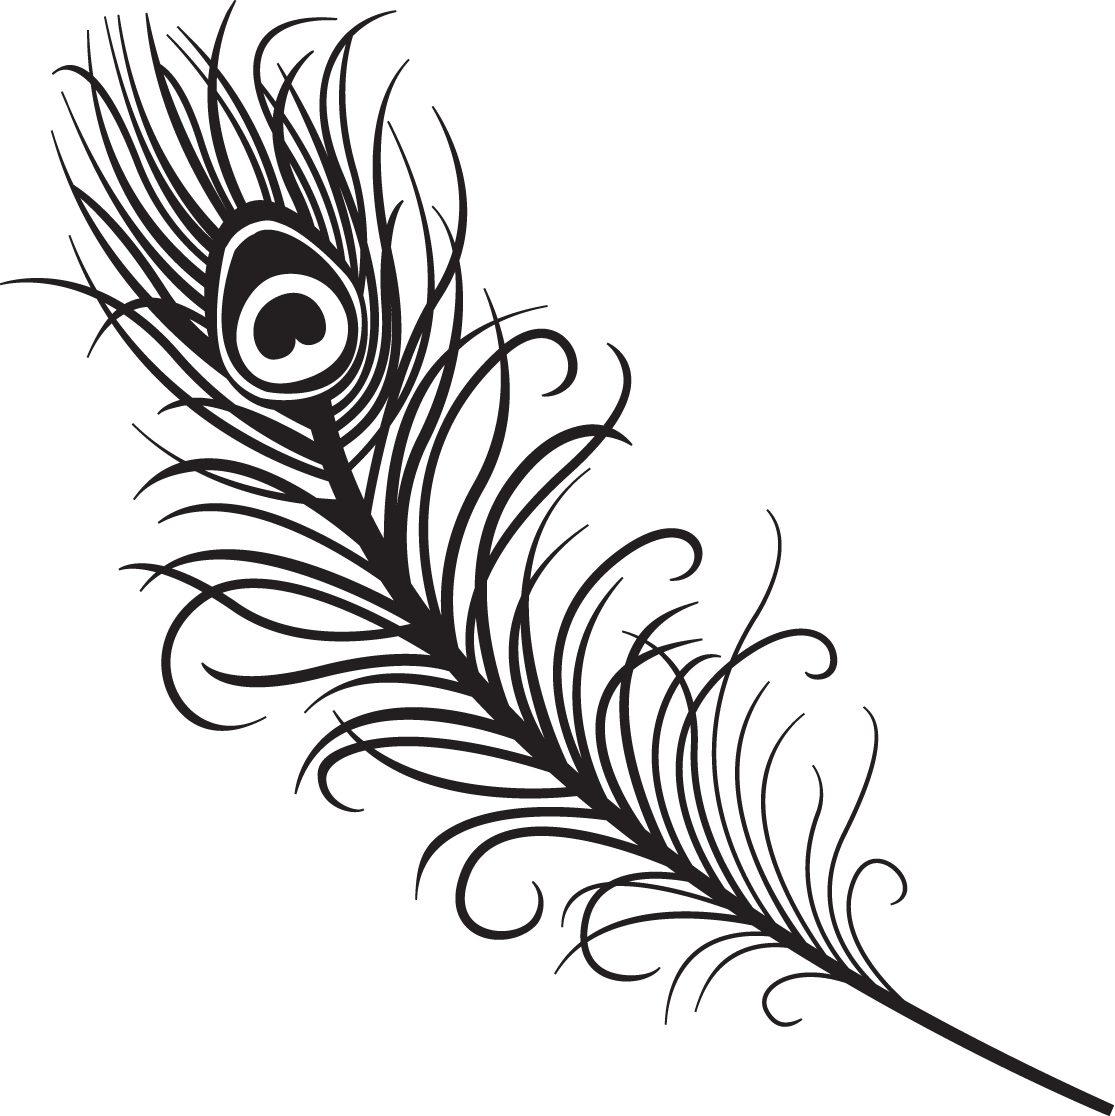 Peacock feather panda free. Clipart designs black and white